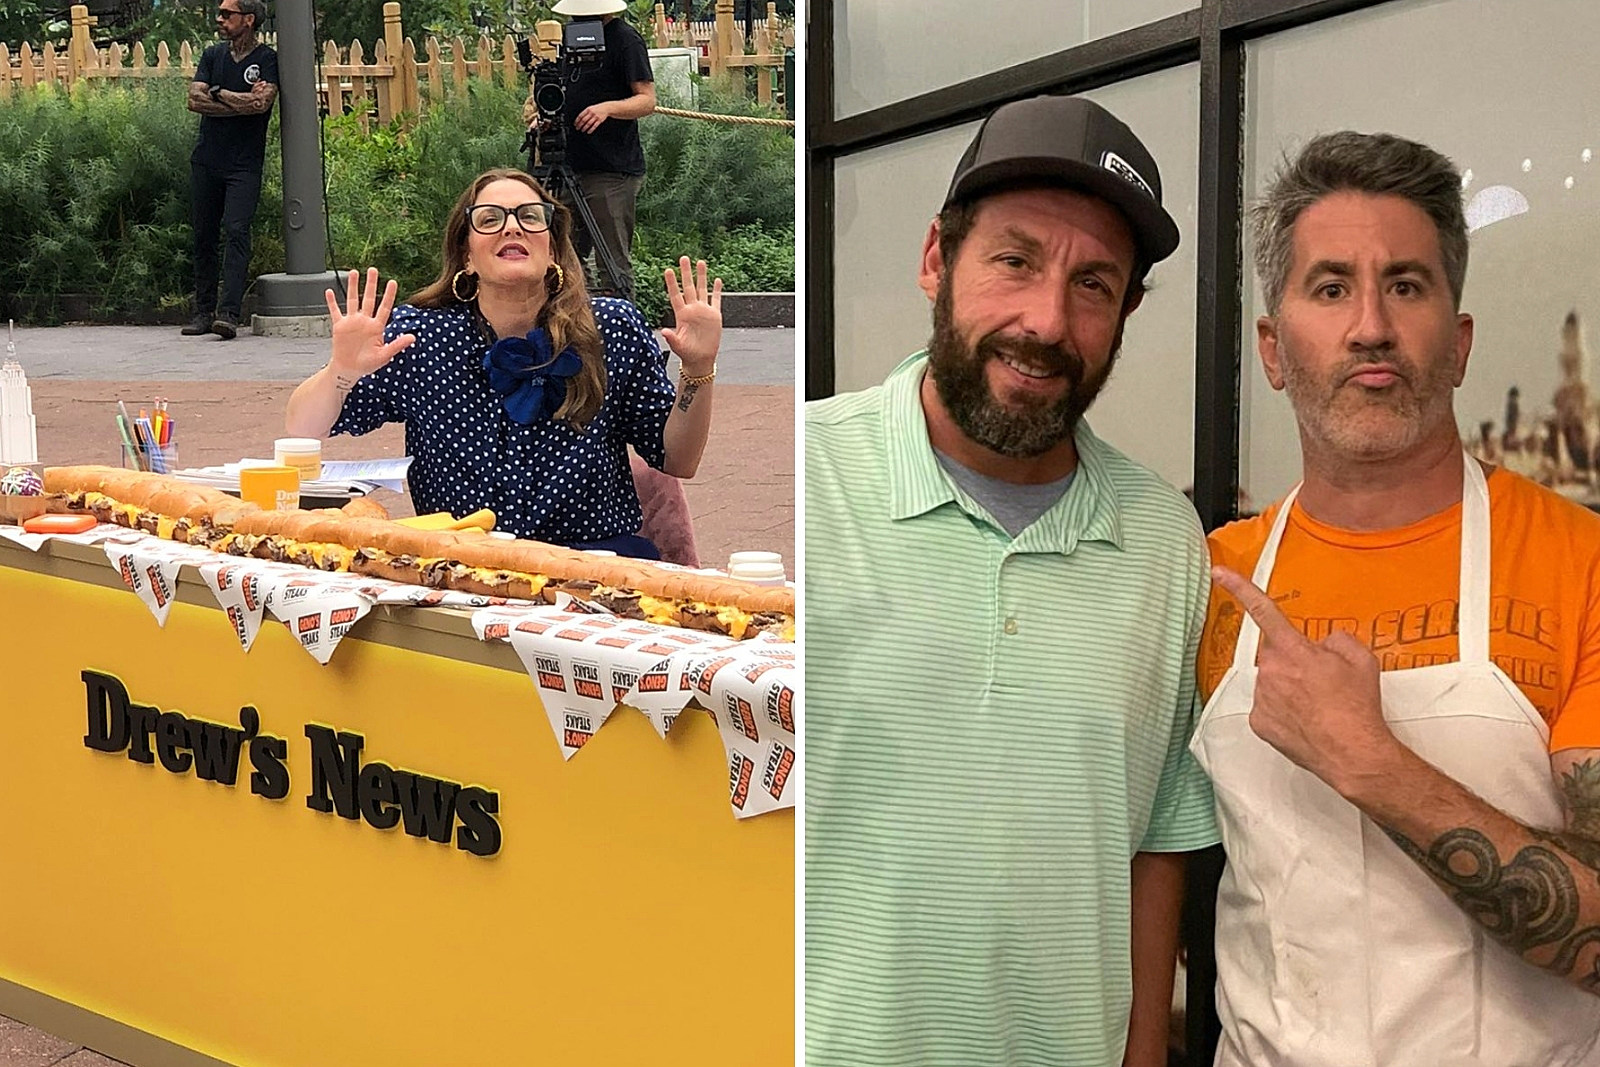 Drew Barrymore & Adam Sandler Were Both Spotted in Philly This Weekend